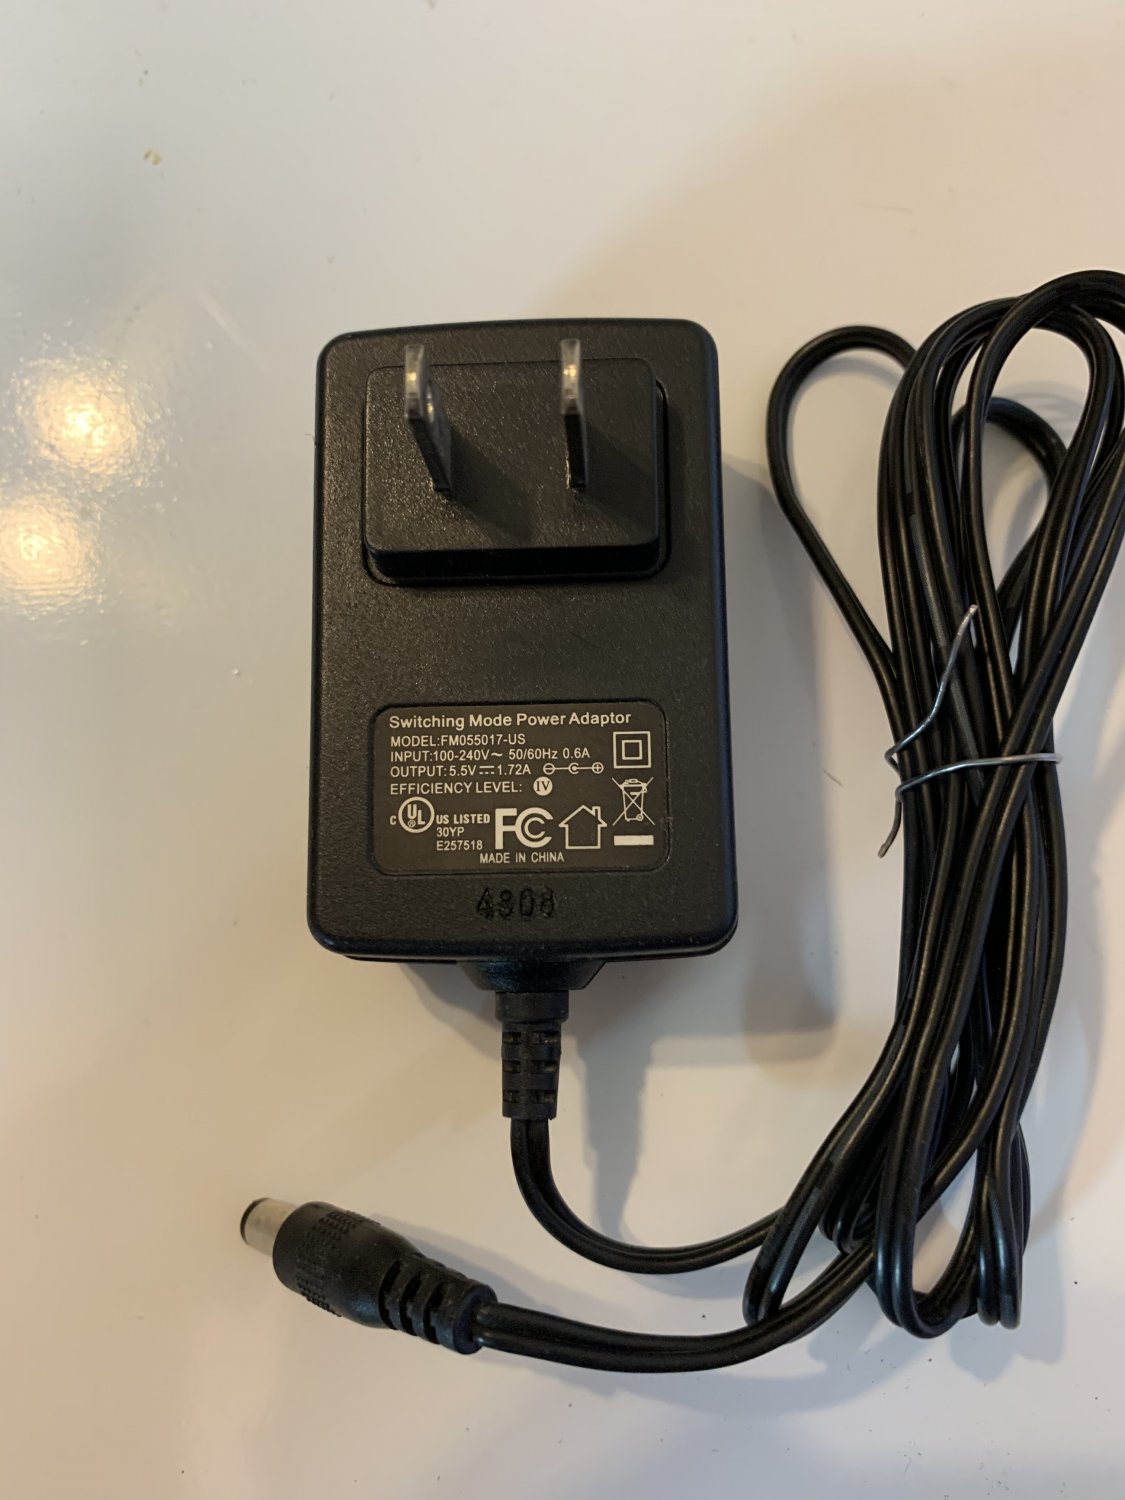 Switching Power Supply FM055017-US AC Adapter 5.5V 1.72A